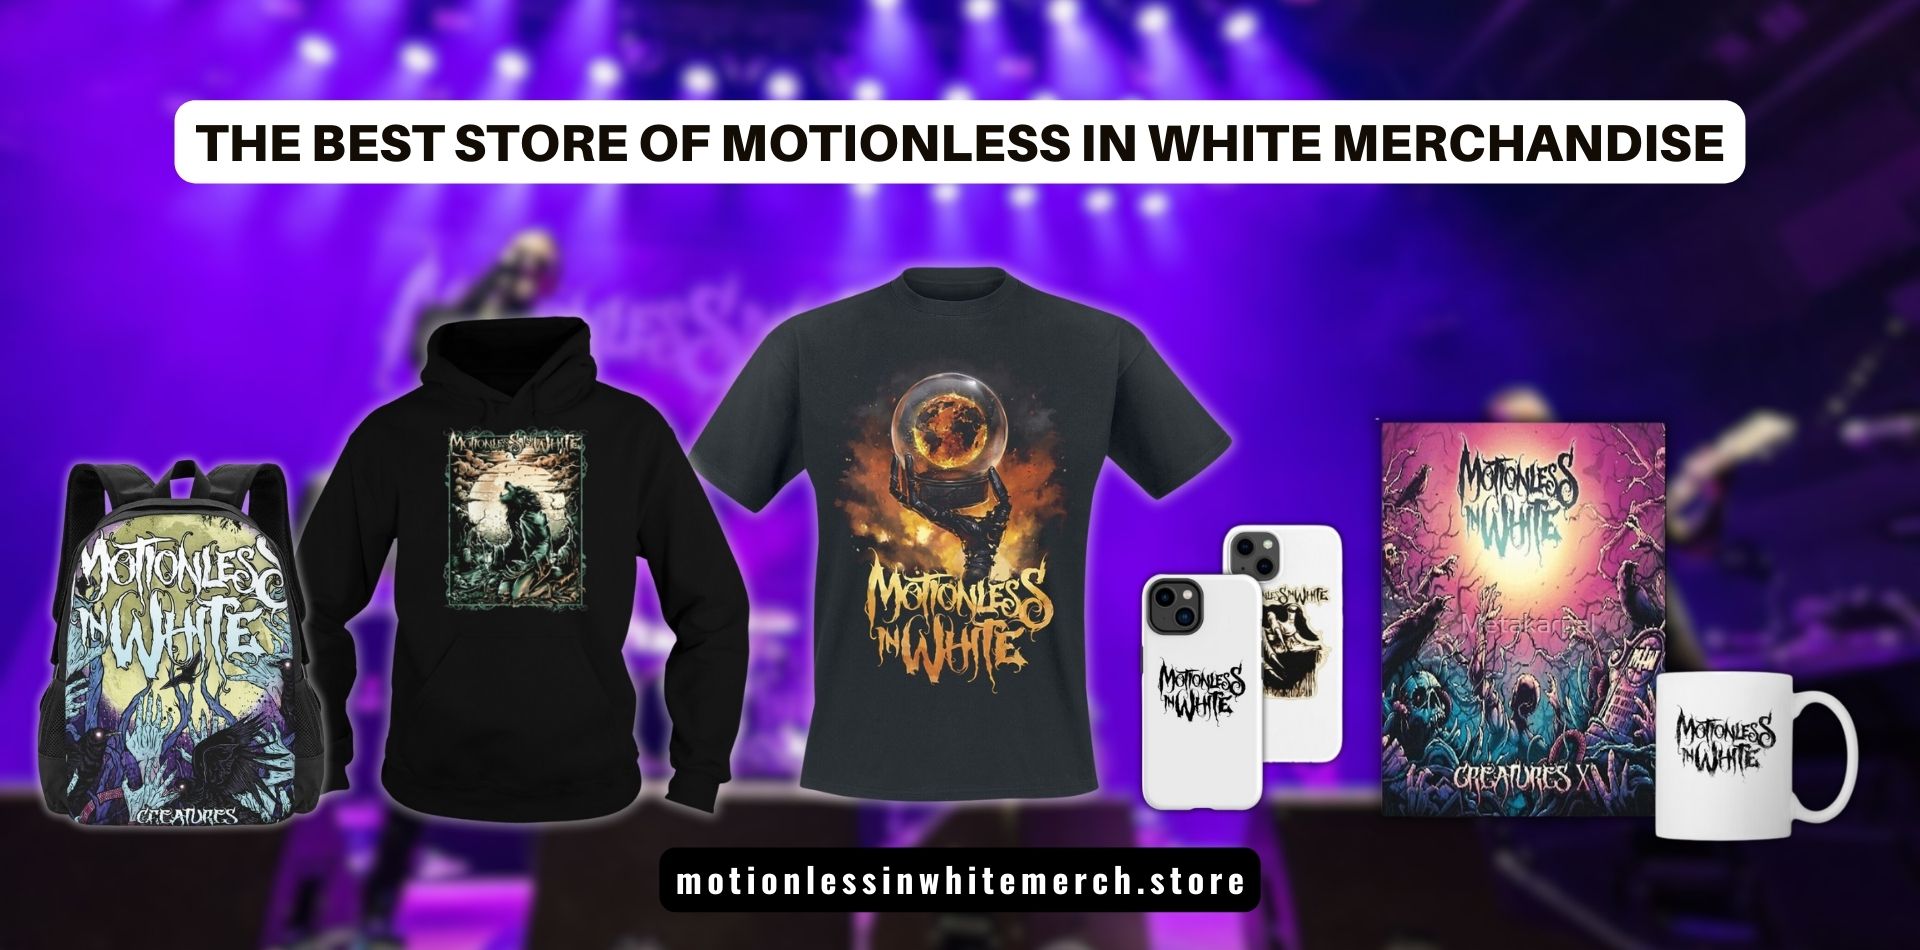 no edit motionless in white Banner - Motionless In White Shop